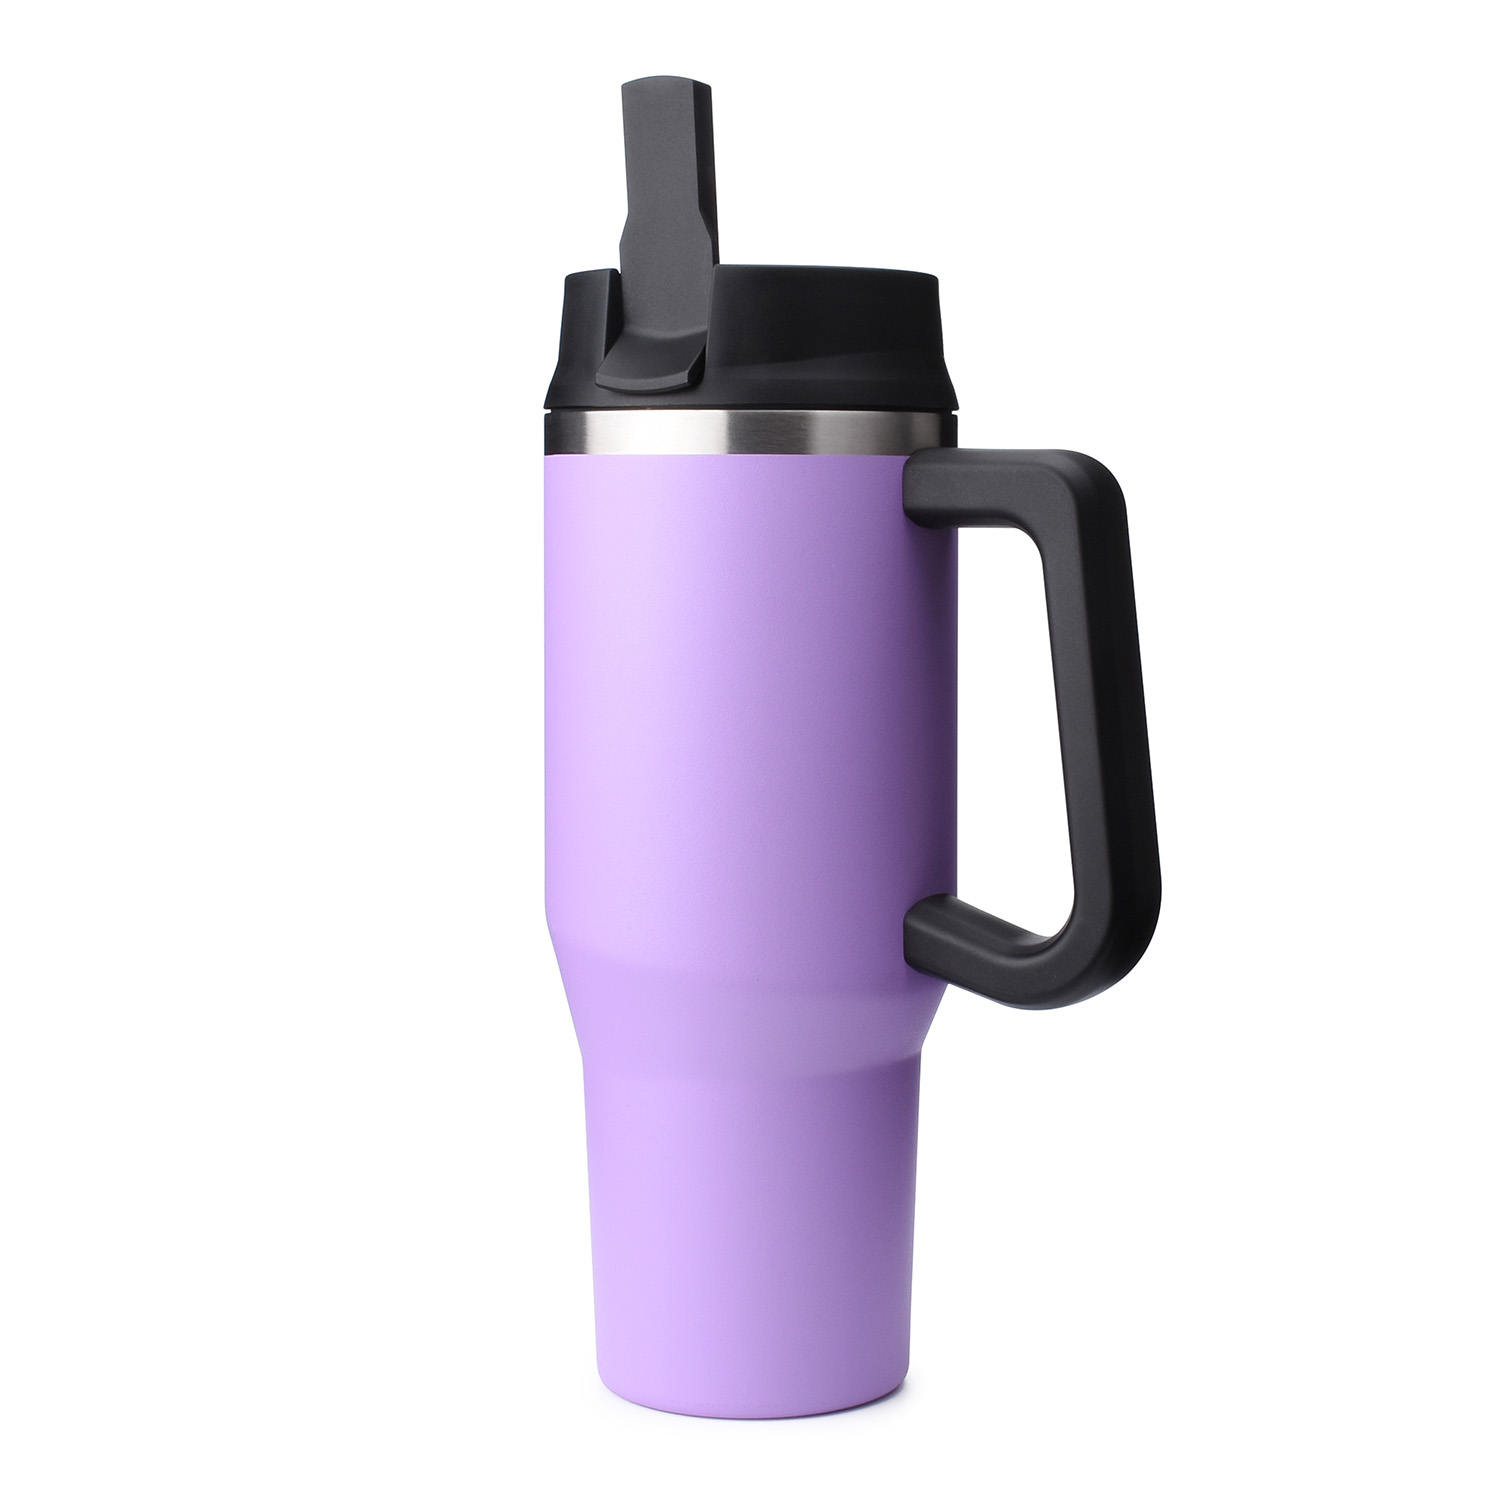 https://www.waterbottle.tech/wp-content/uploads/2021/09/insulated-travel-tumbler-with-handle-32-oz-straw-lid-s213200-3.jpg